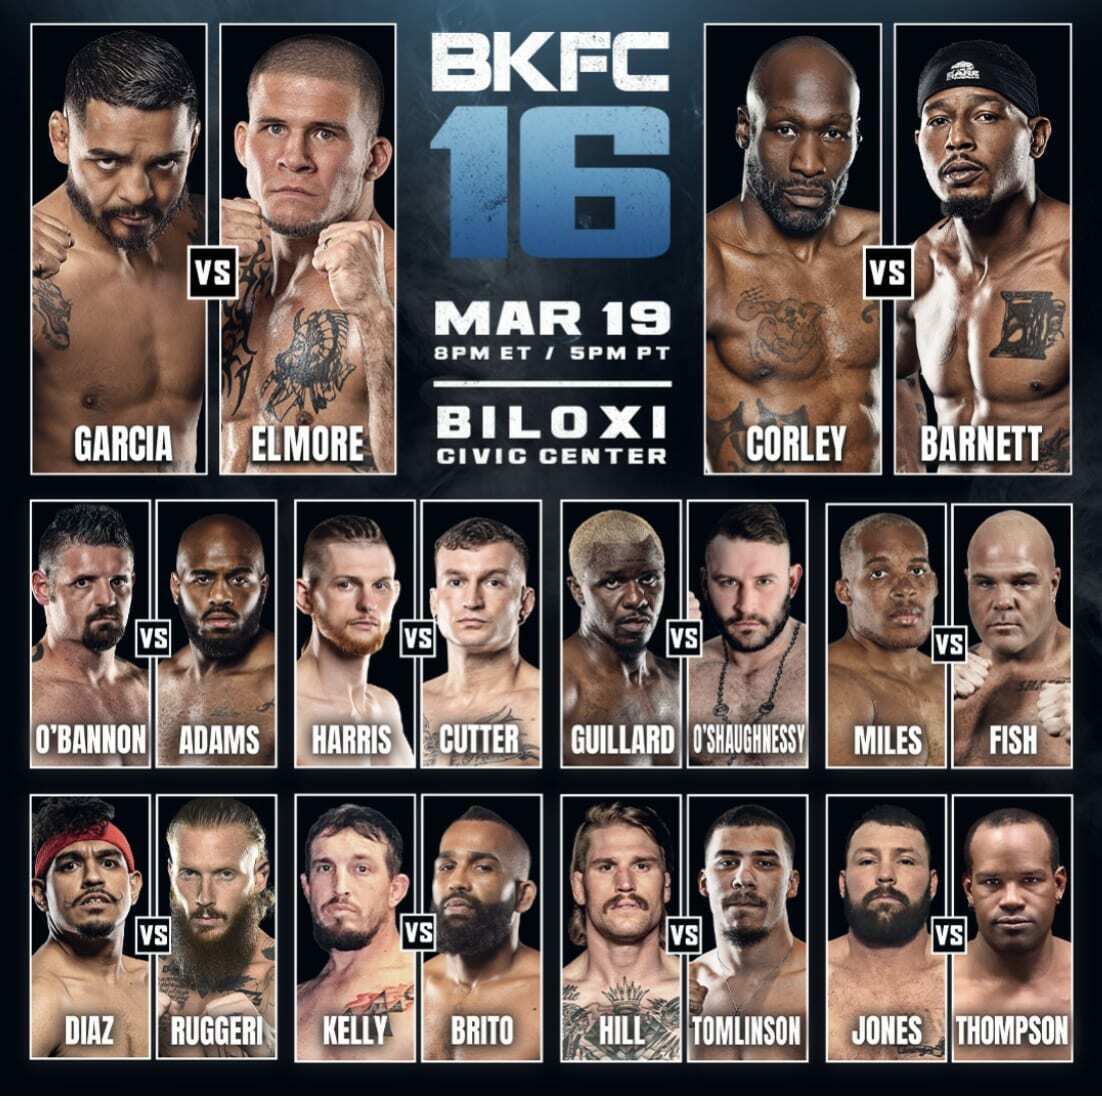 Feldman says BKFC 16 already sold out, Elmore hopes to make it 3 in a row